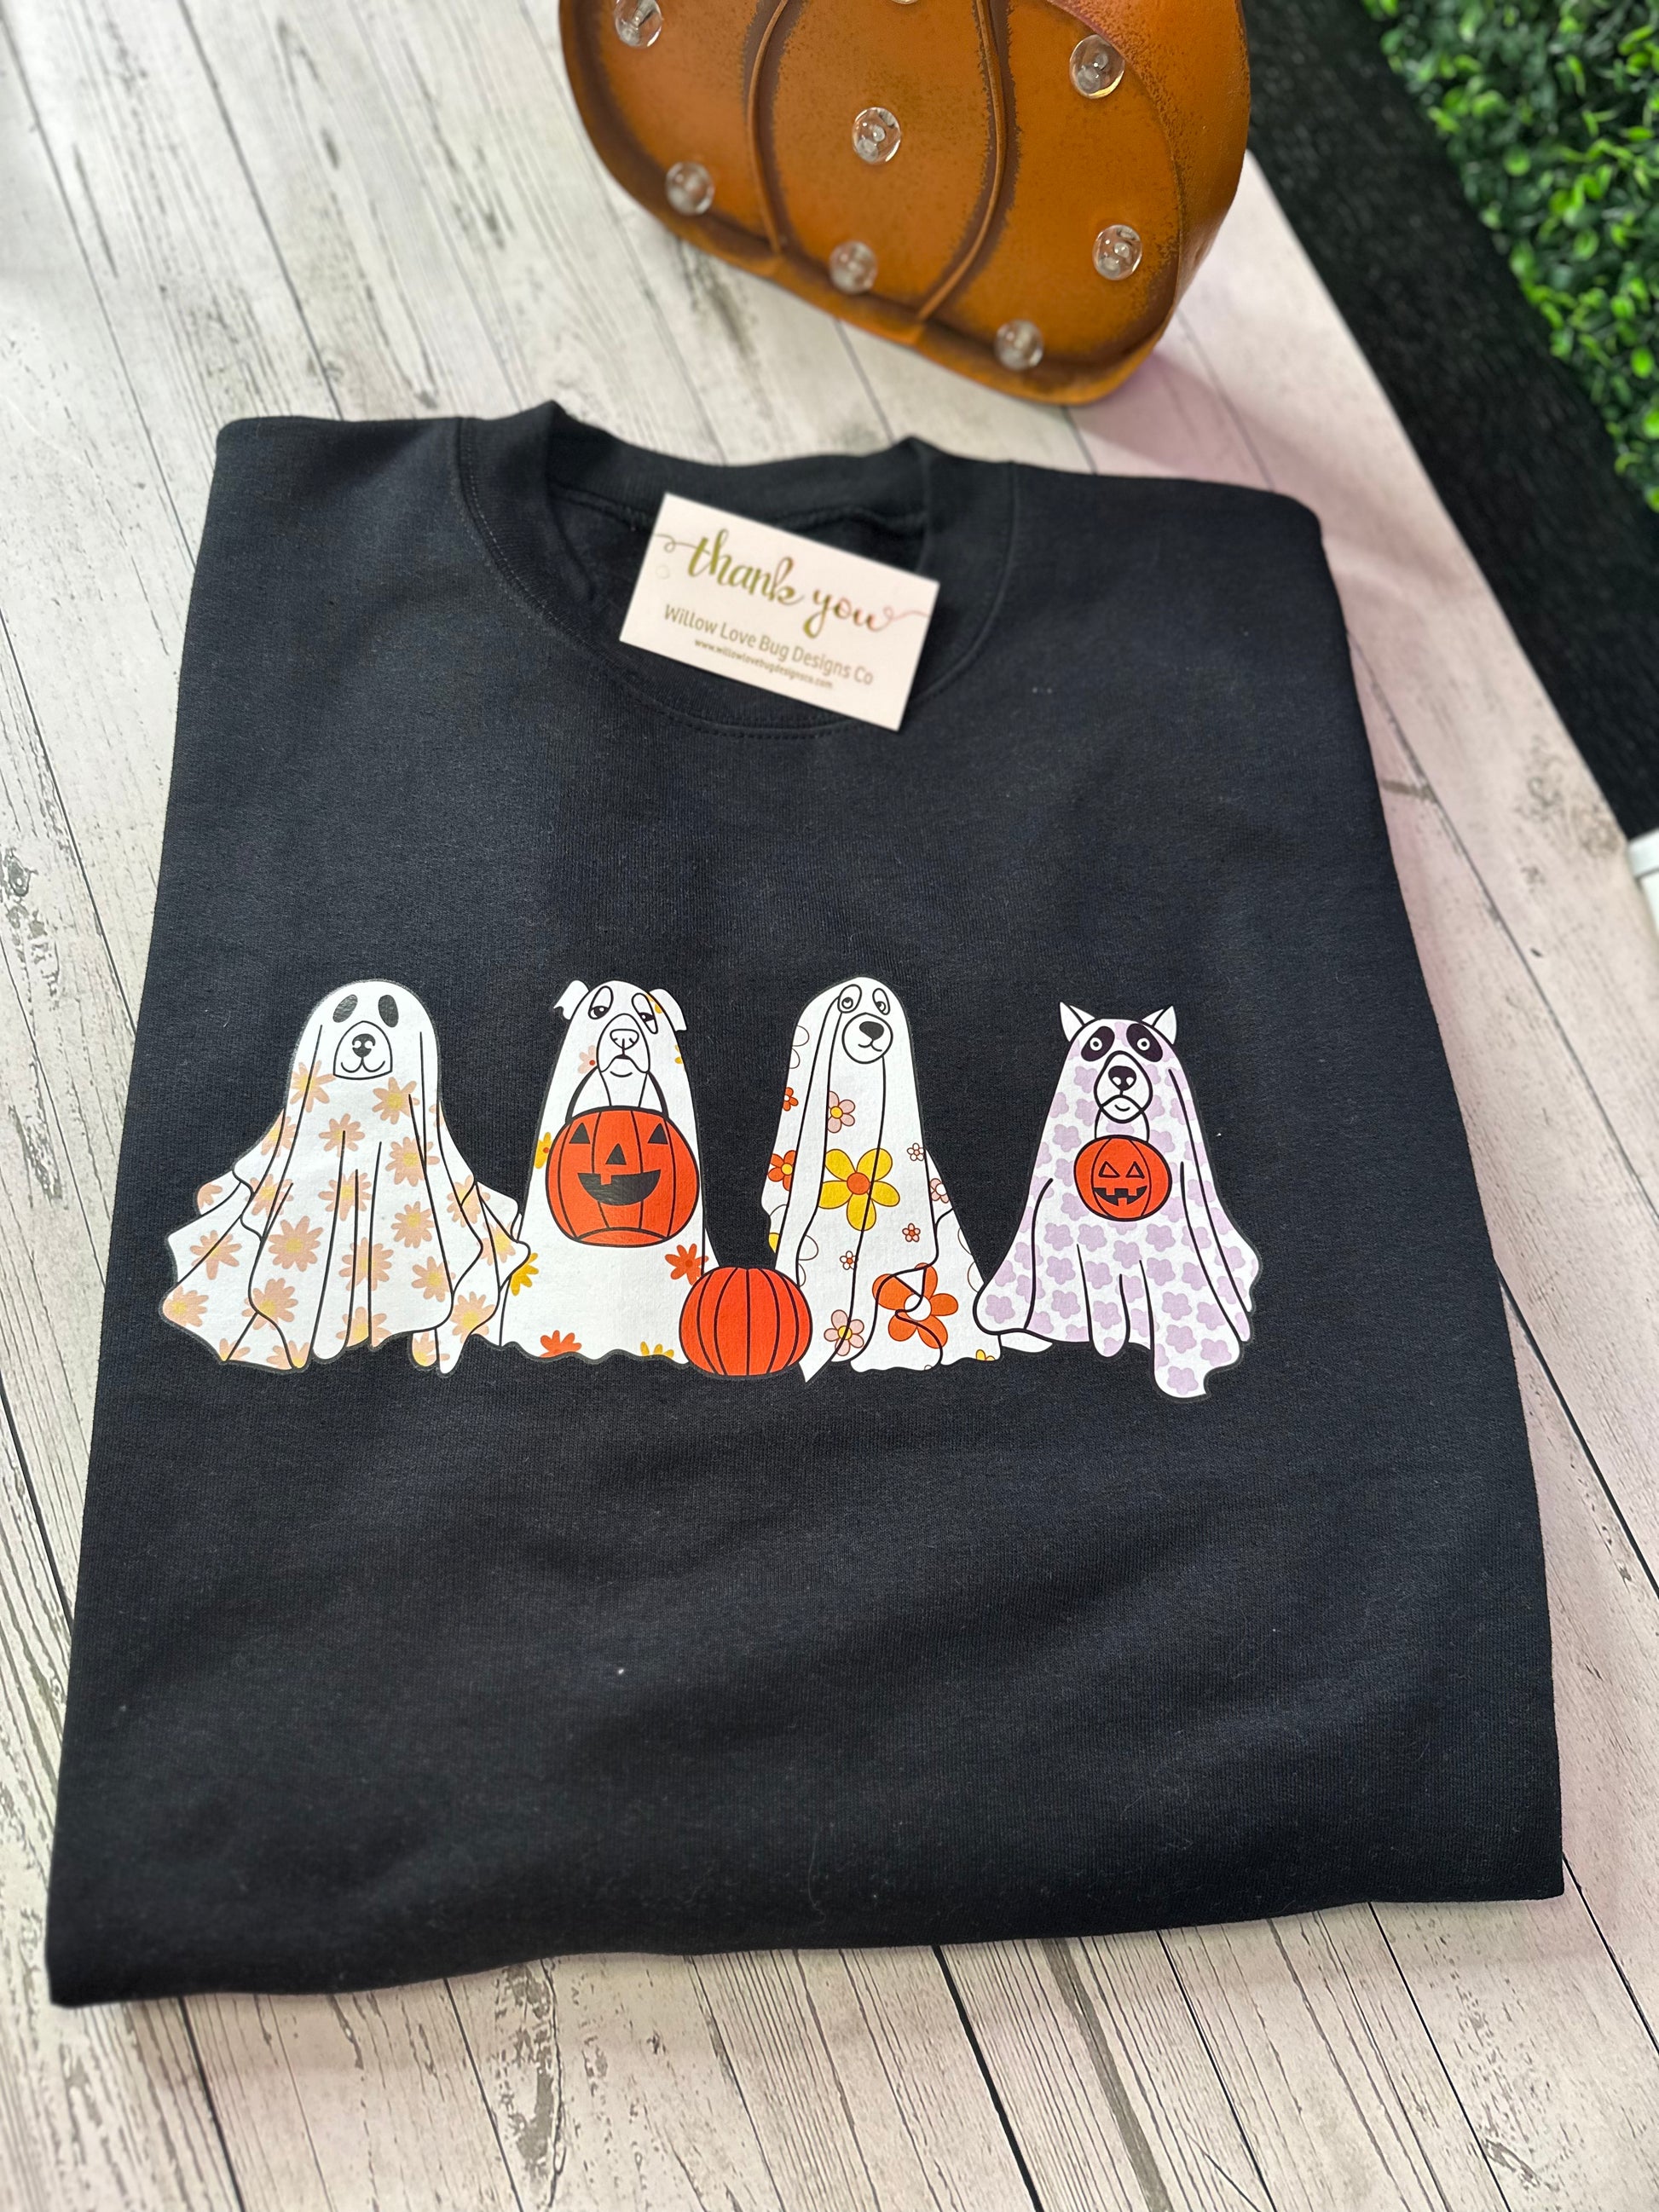 Ghost Dogs Tee or Crewneck - Willow Love Bug Designs 